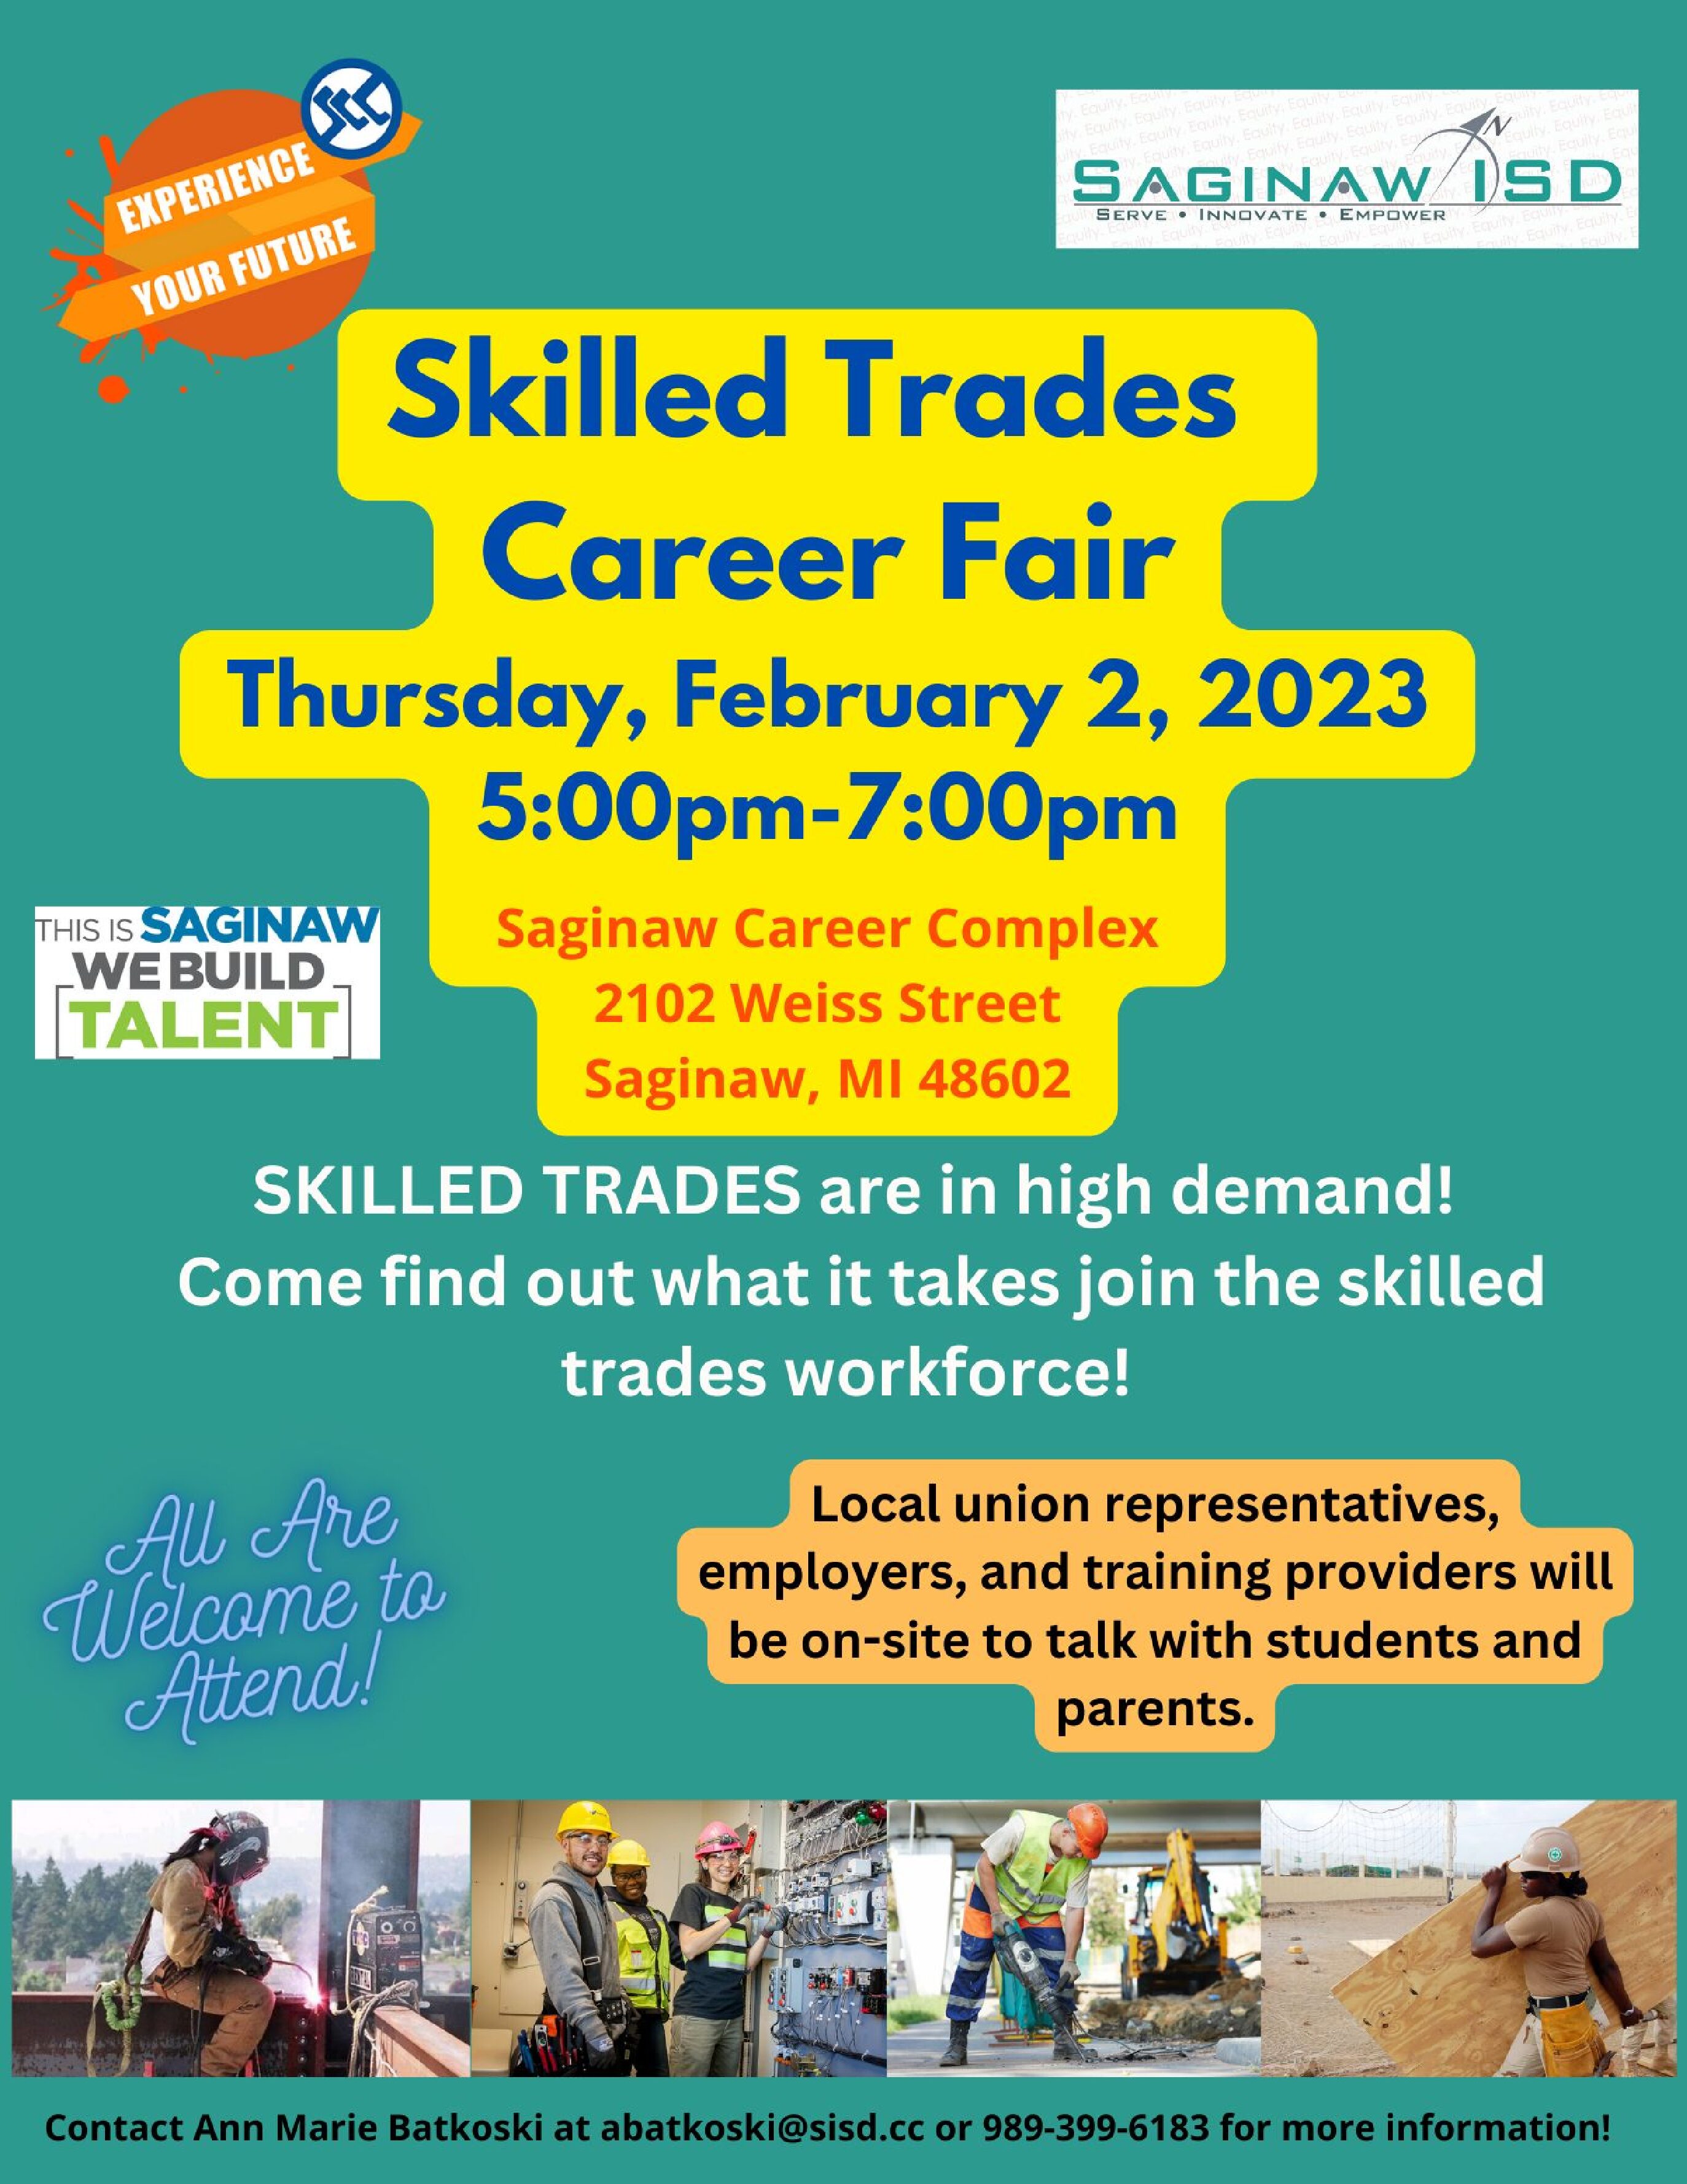 <h1 class="tribe-events-single-event-title">Skilled Trades Career Fair</h1>